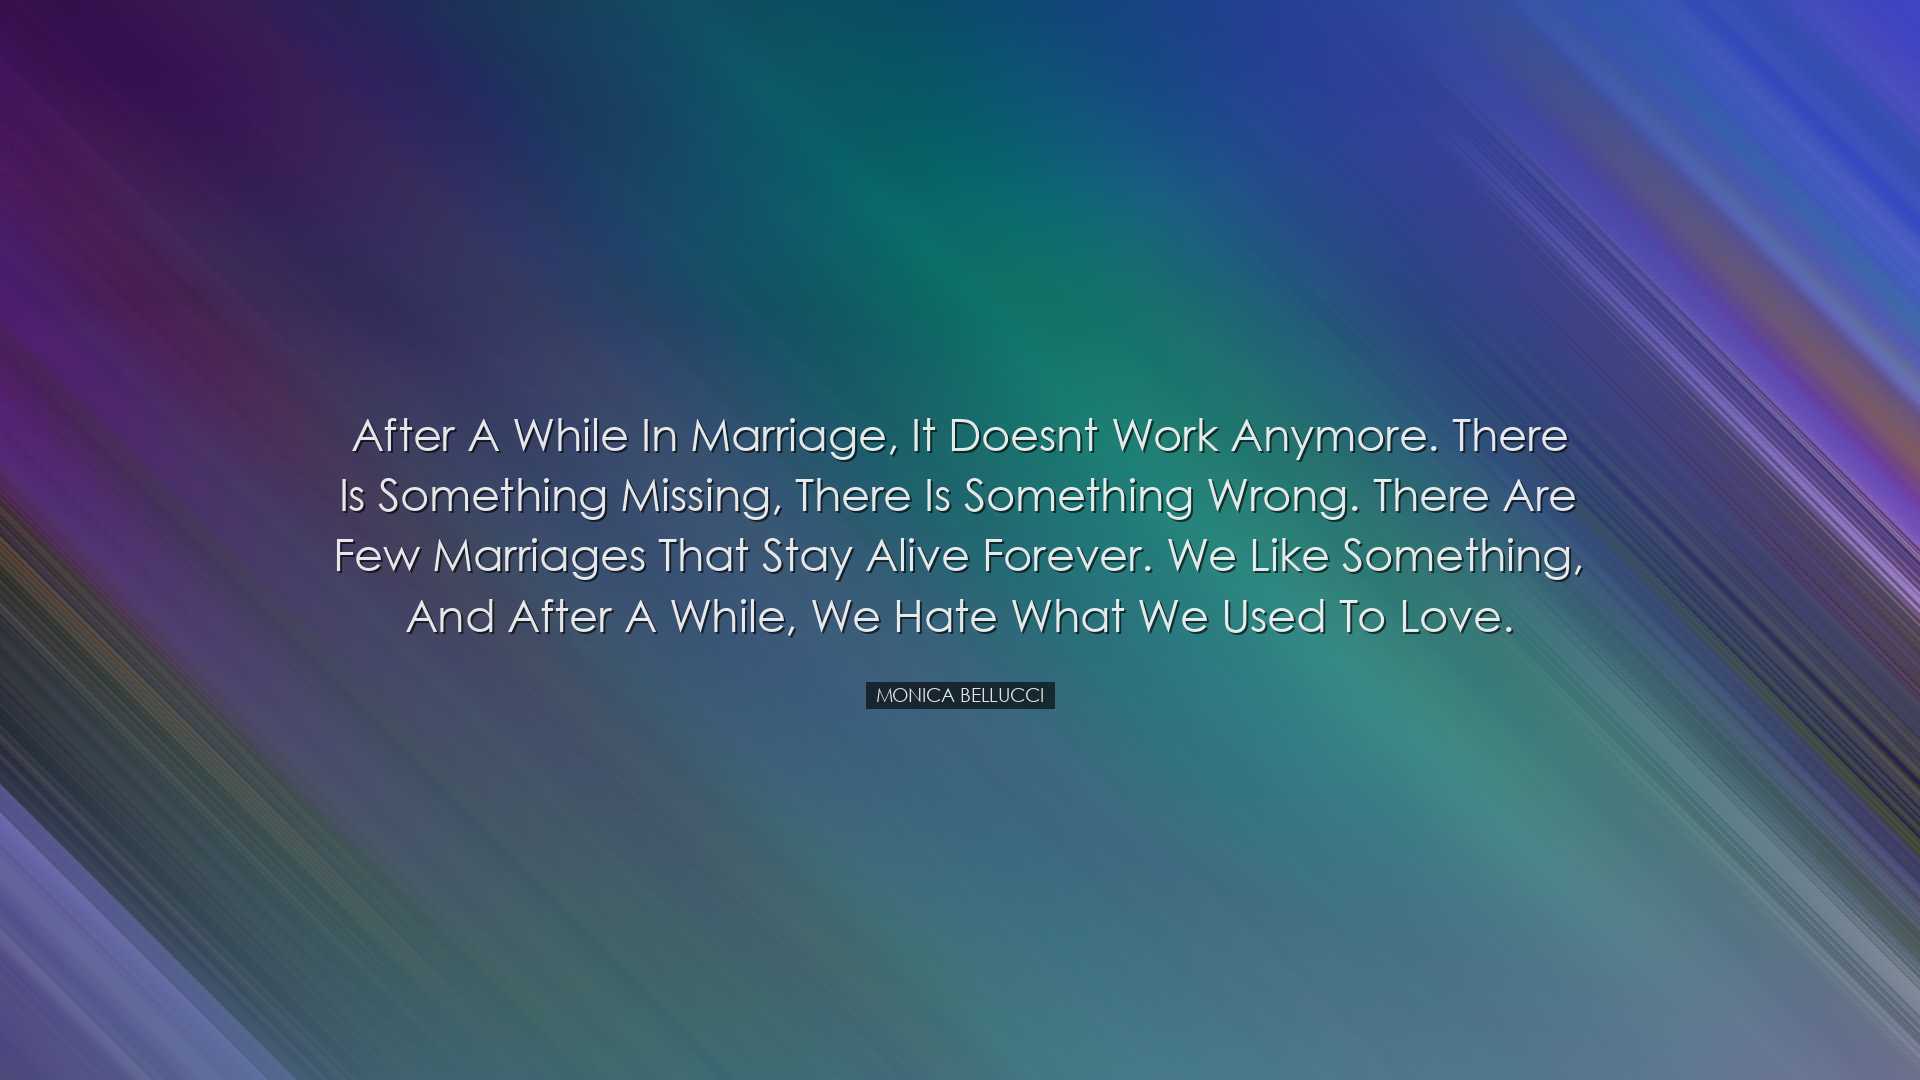 After a while in marriage, it doesnt work anymore. There is someth